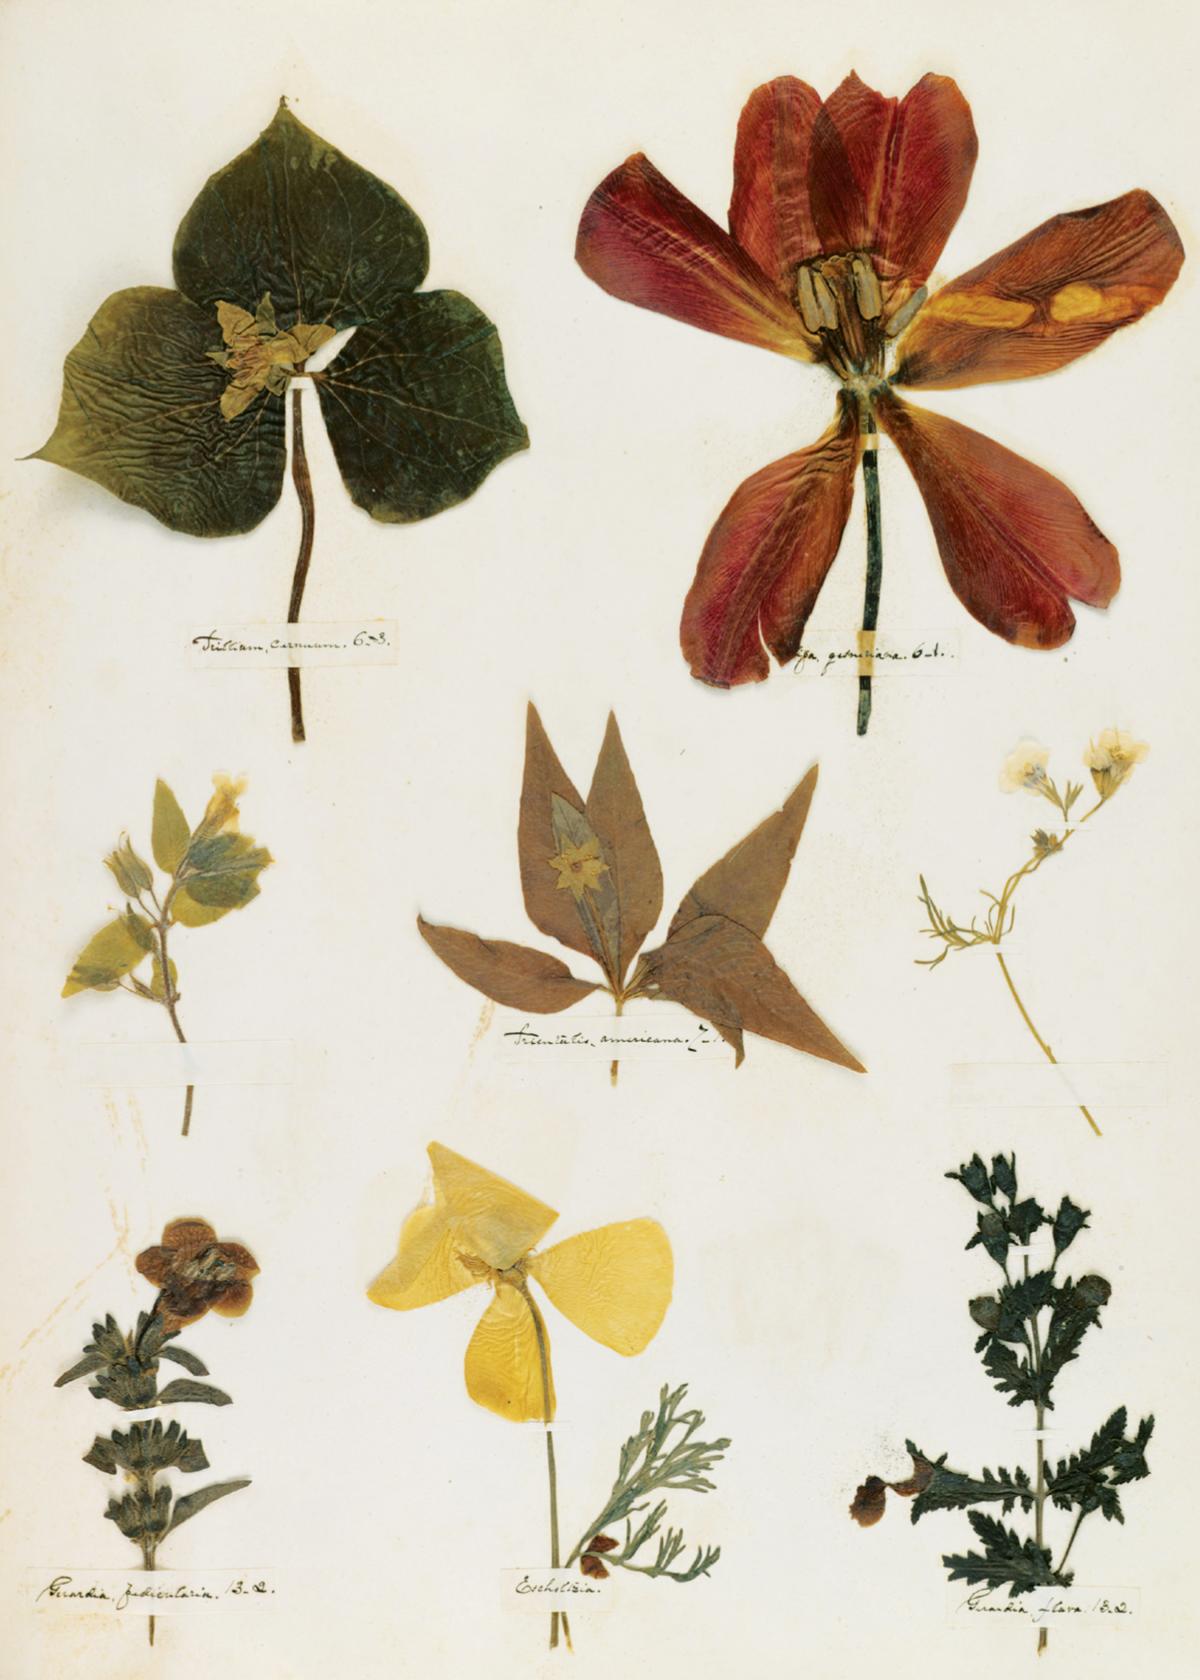 Photograph of pressed flowers